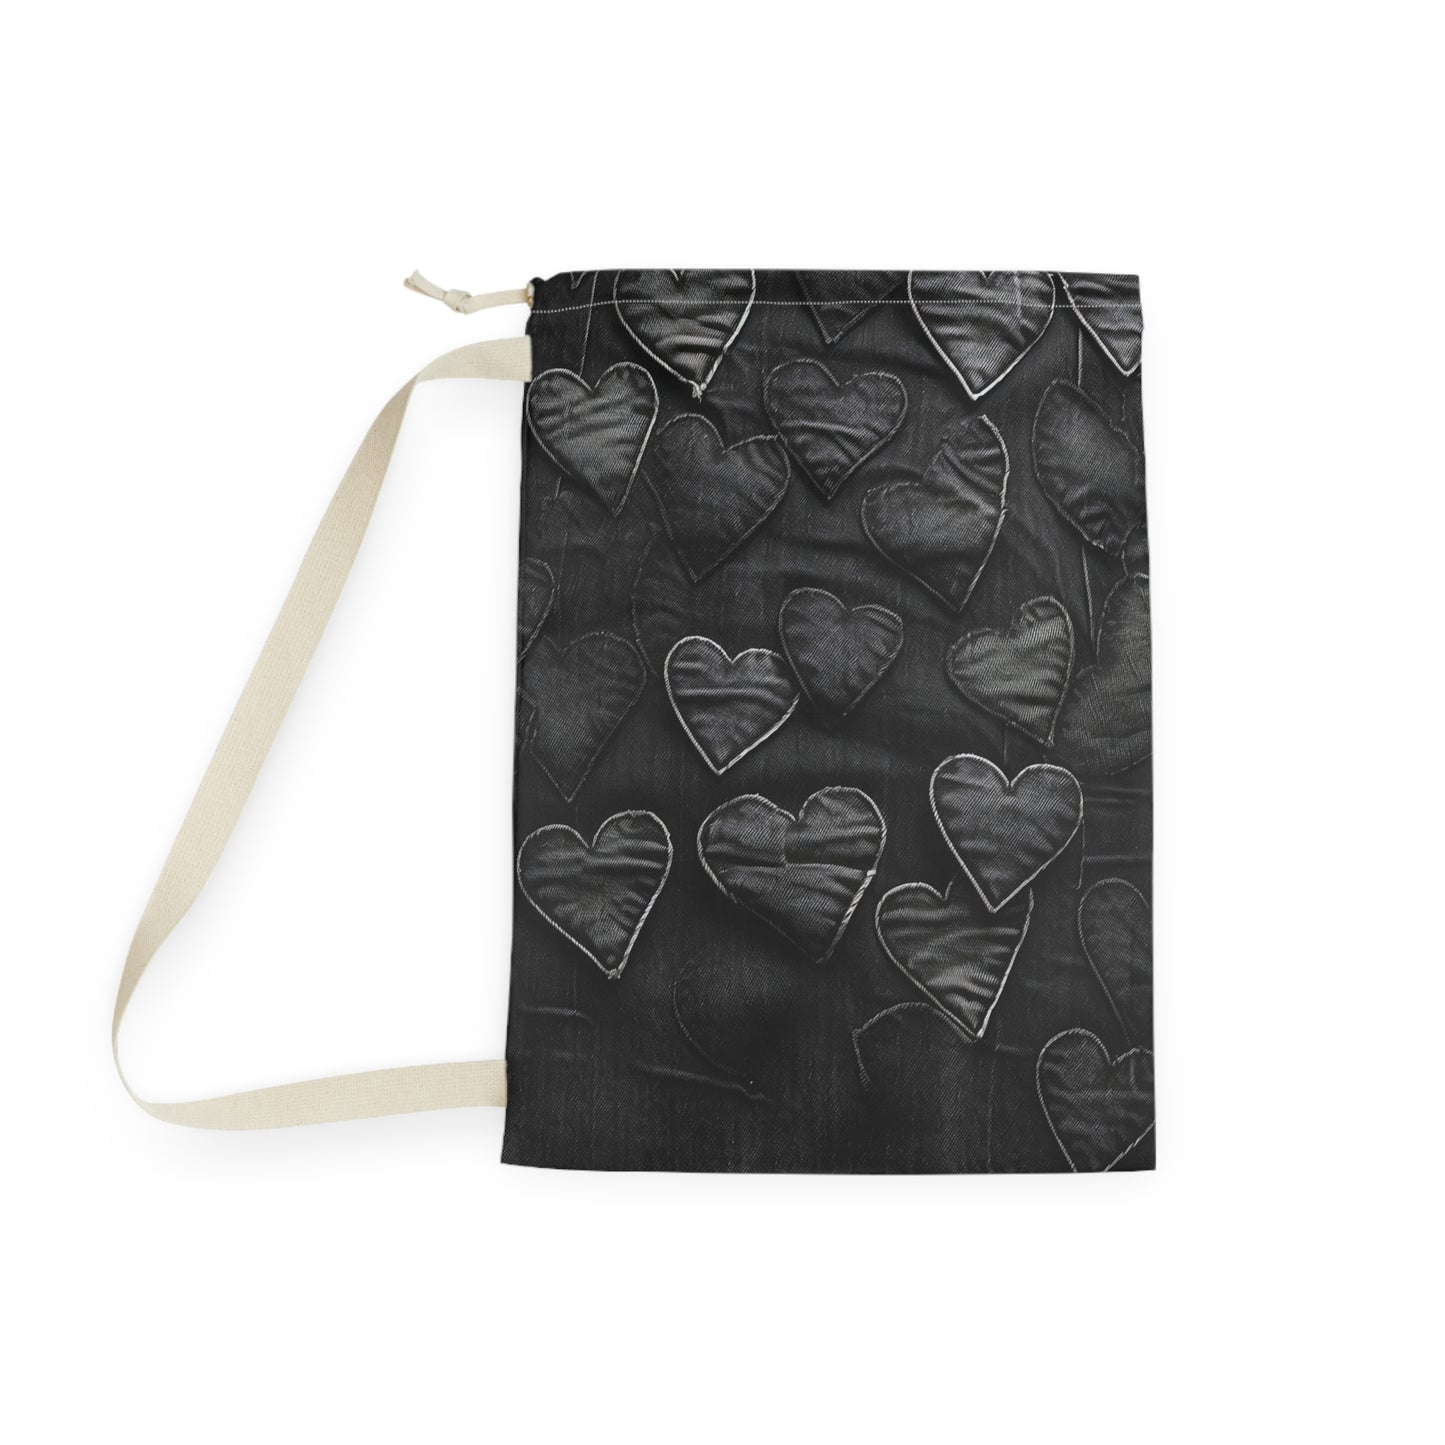 Black: Distressed Denim-Inspired Fabric Heart Embroidery Design - Laundry Bag